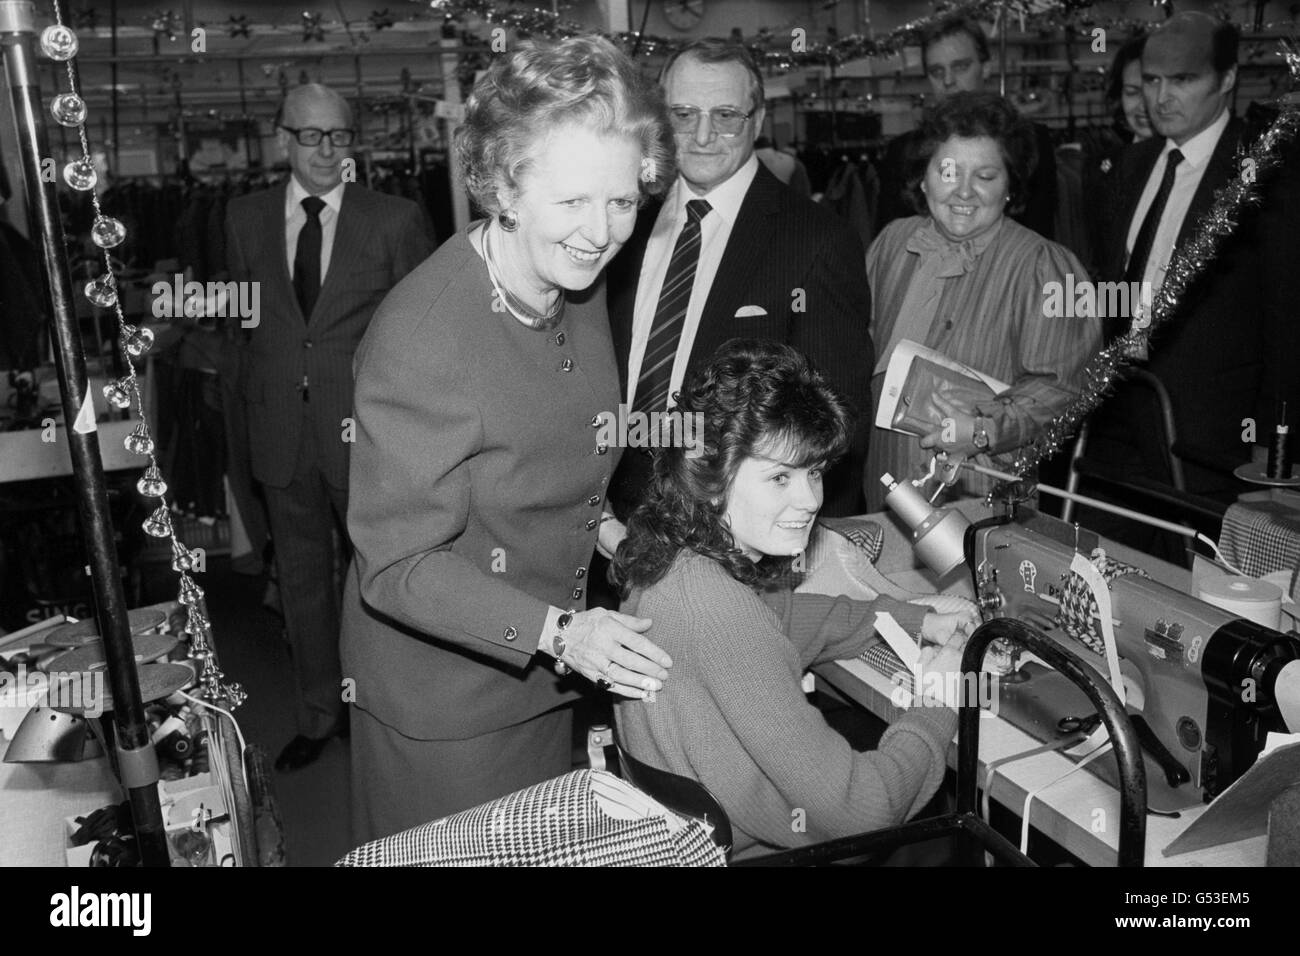 Prime Minister Margaret Thatcher looks over the shoulder of a sewing  machinist when she visited the Aquascutum factory in Hemel Hemstead, Herts.  Mrs Thatcher, an Aquascutum customer, is the first British Prime